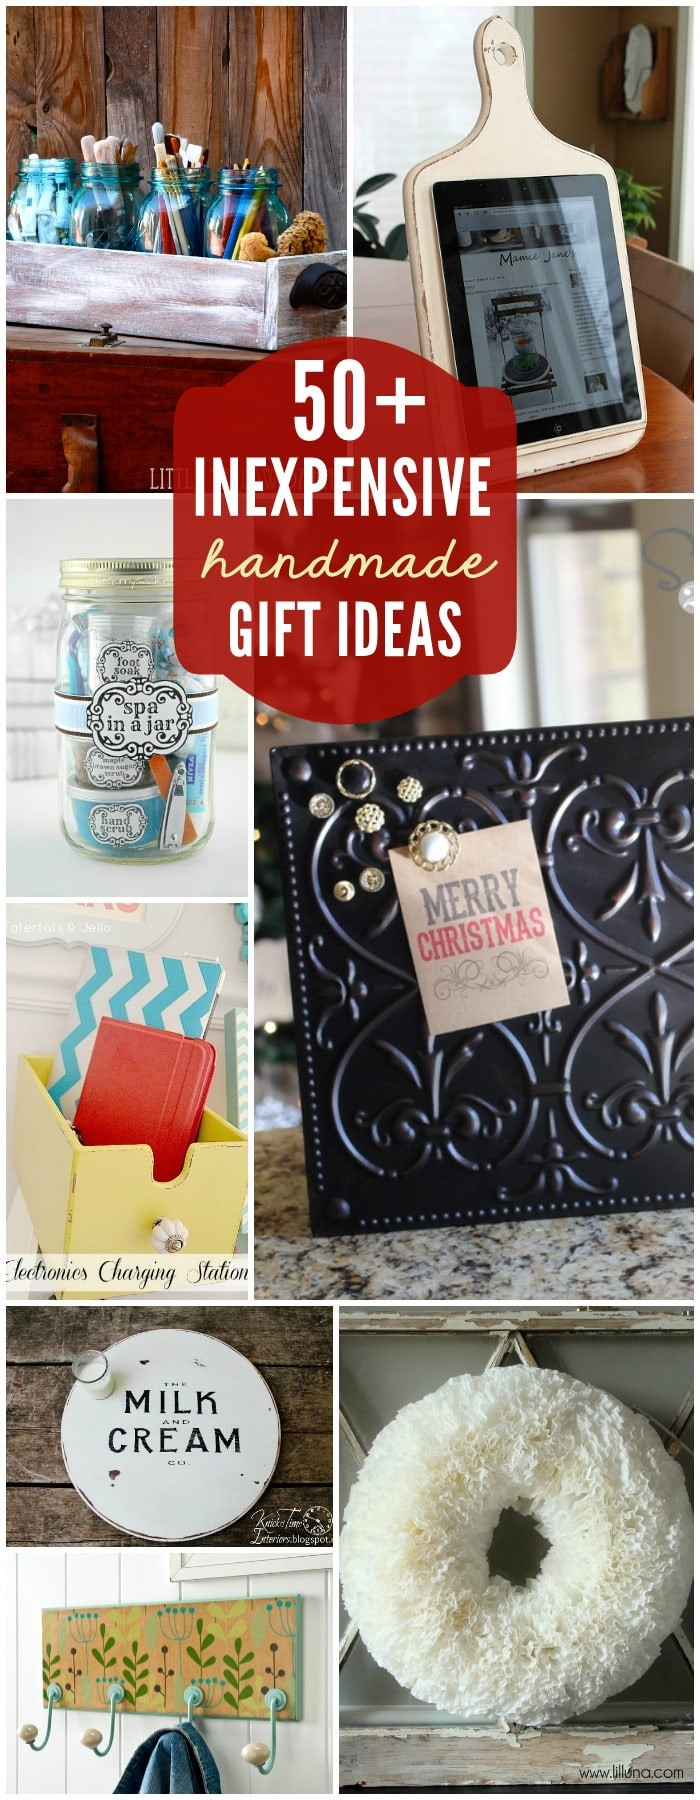 Small Holiday Gift Ideas
 Easy DIY Gift Ideas